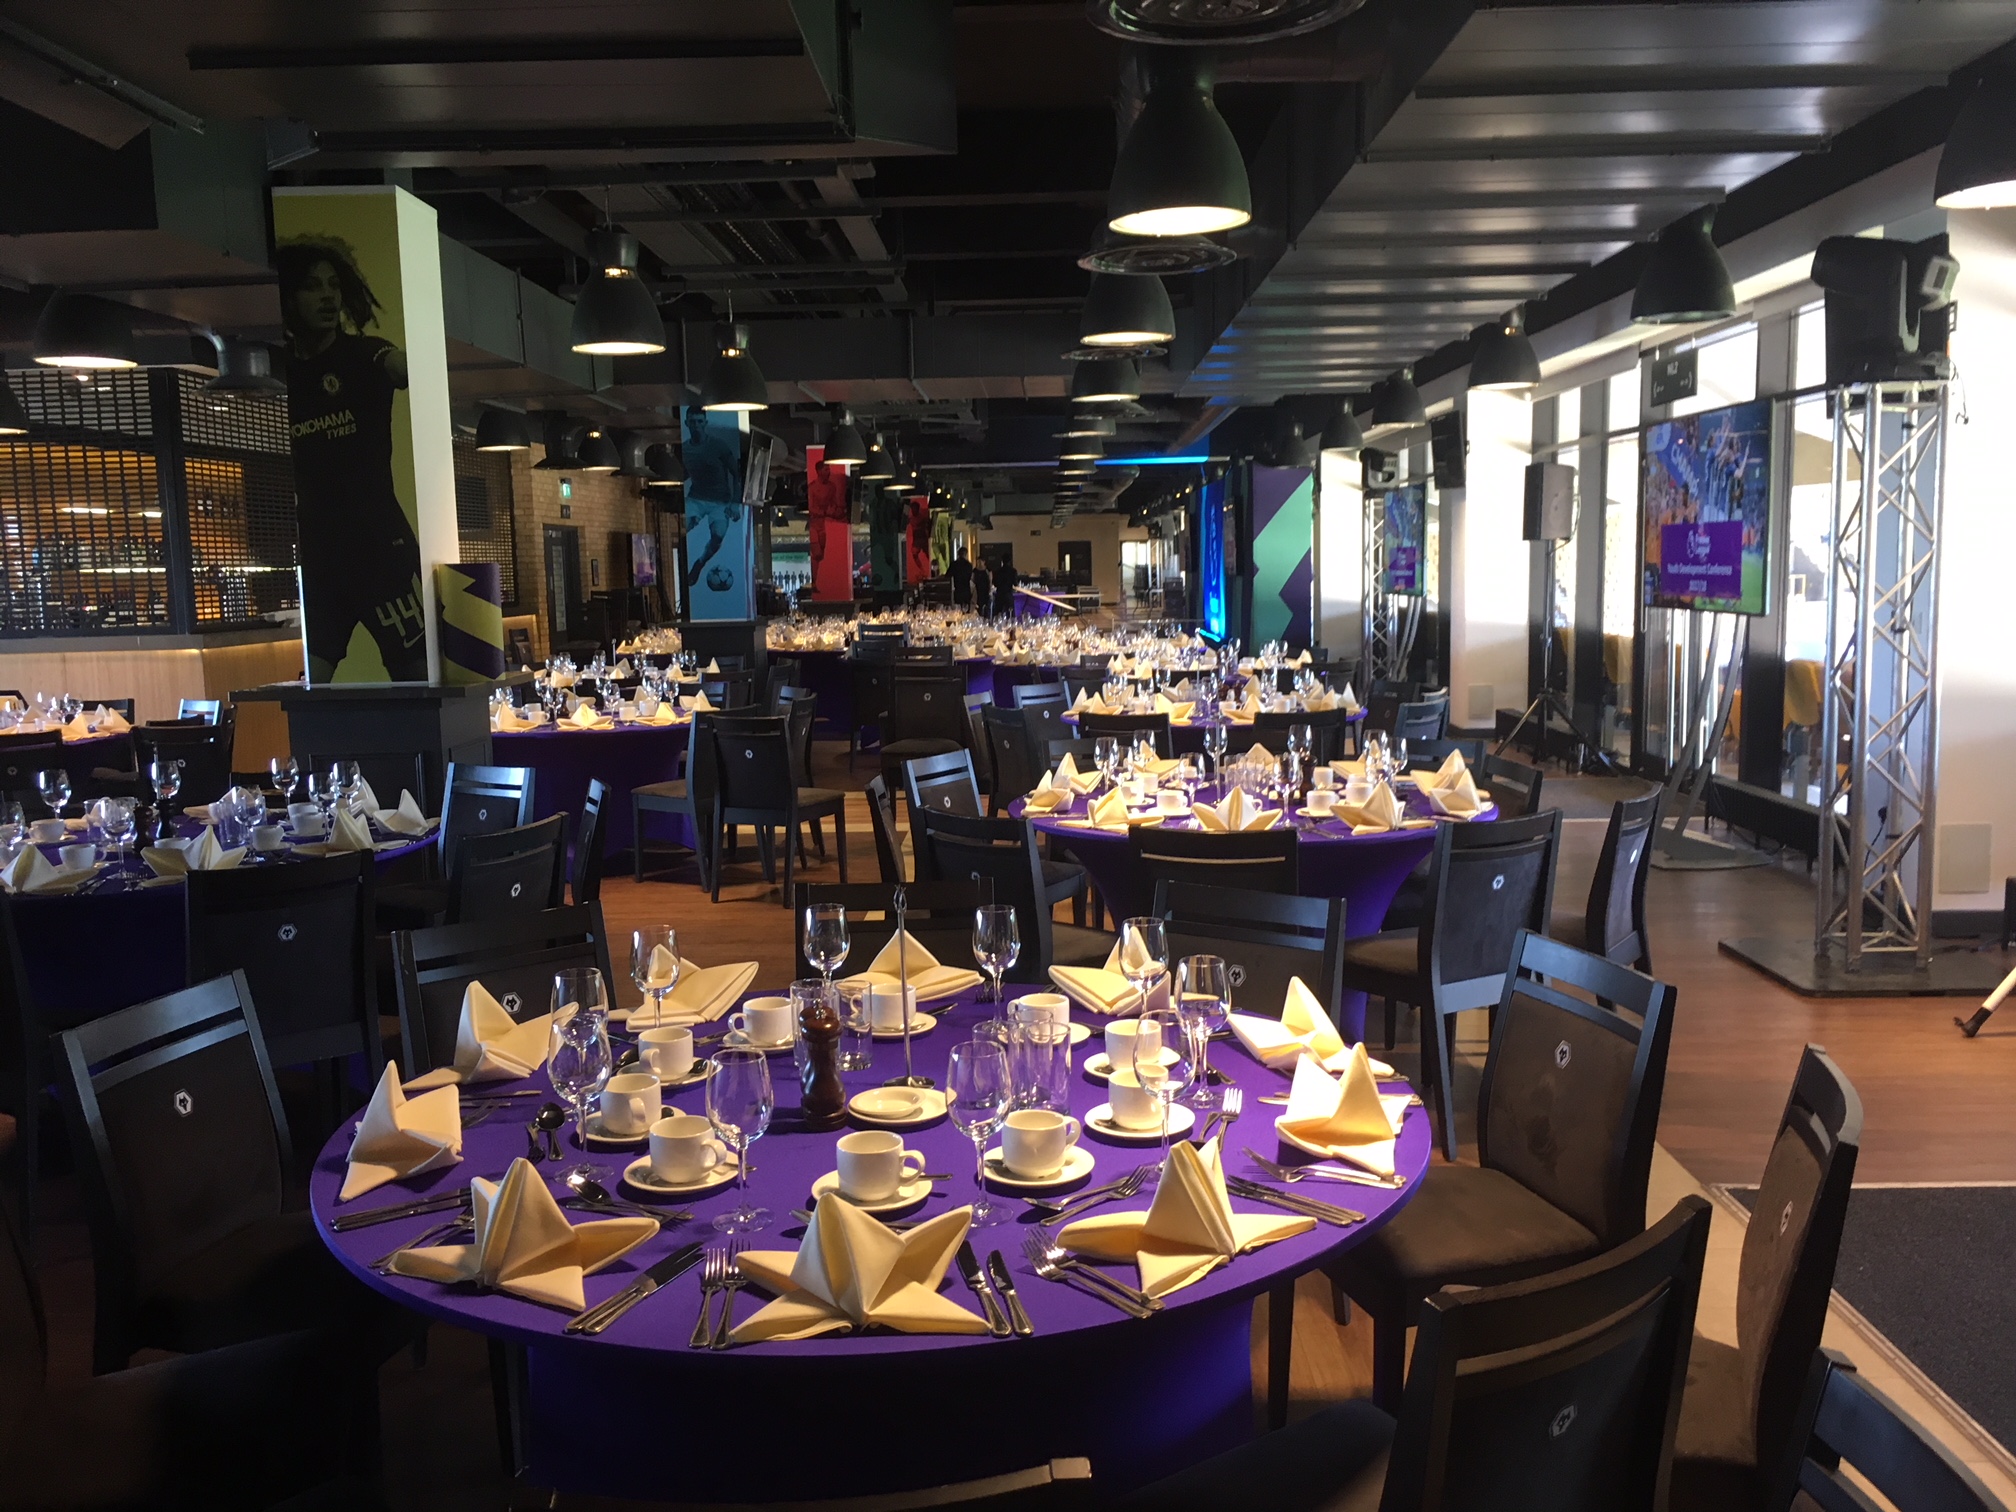 Molineux Stadium Conference & Events